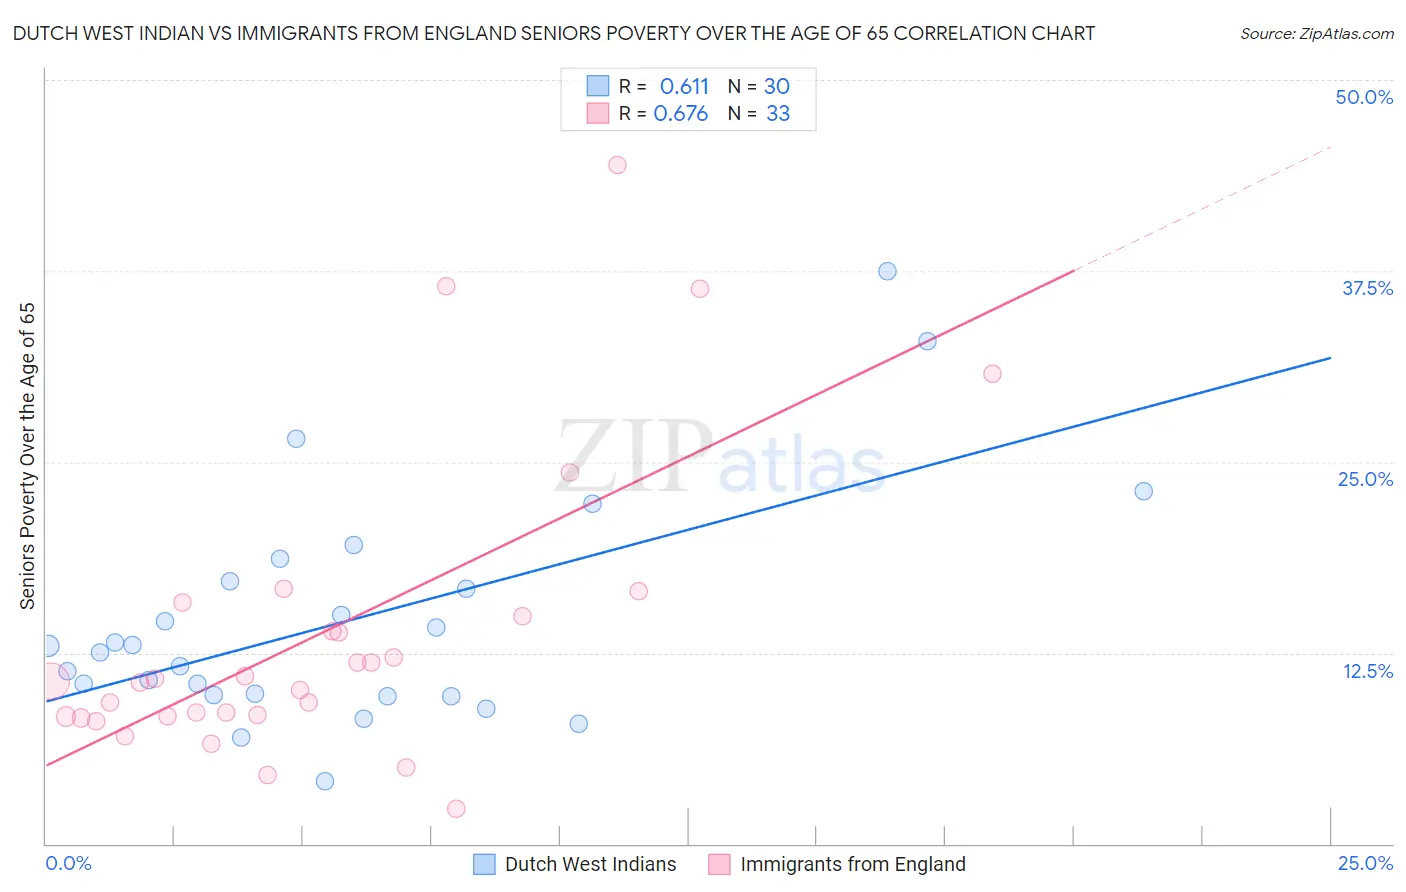 Dutch West Indian vs Immigrants from England Seniors Poverty Over the Age of 65